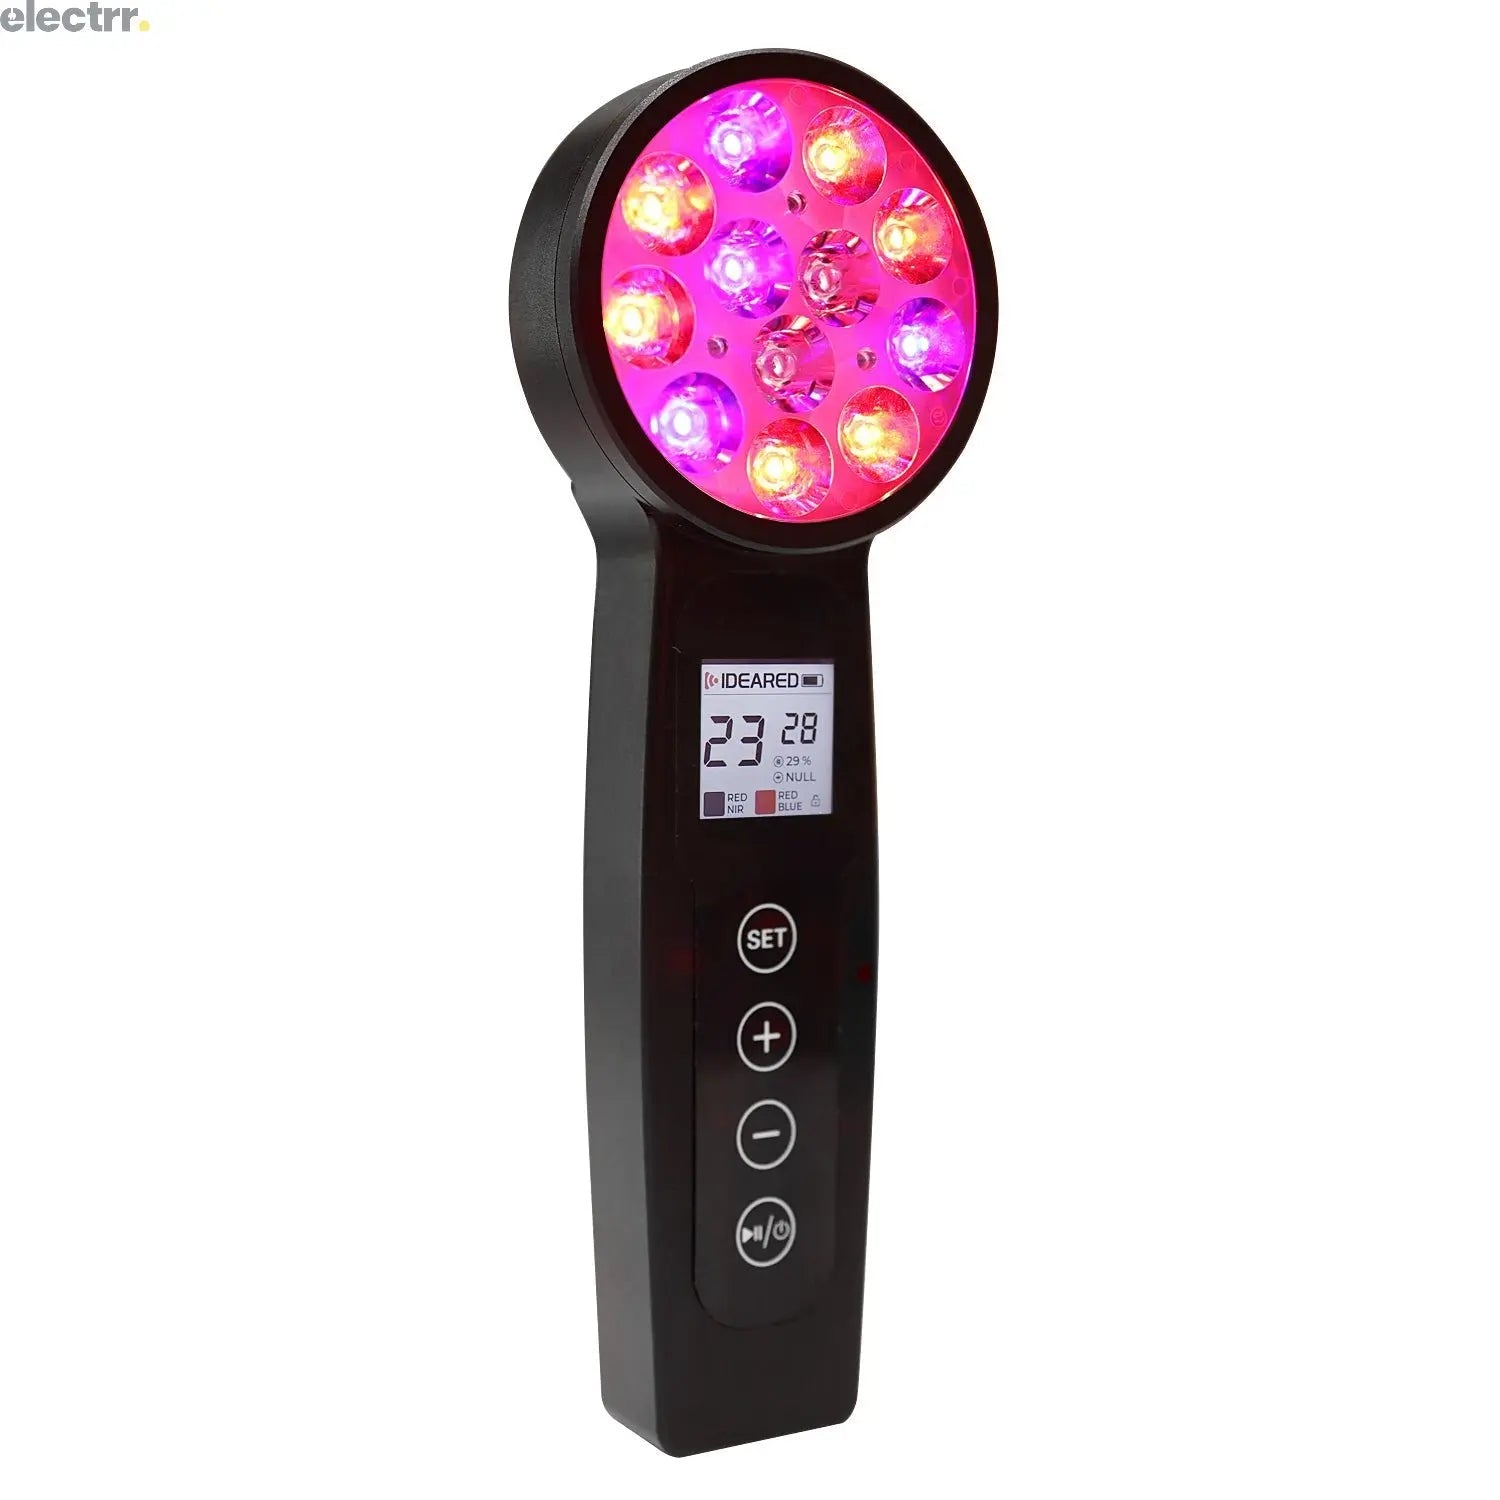 Rechargeable Blue Red Light Therapy Device for Skin Beauty Handheld Multi Functions Red Light Therapy | Electrr Inc